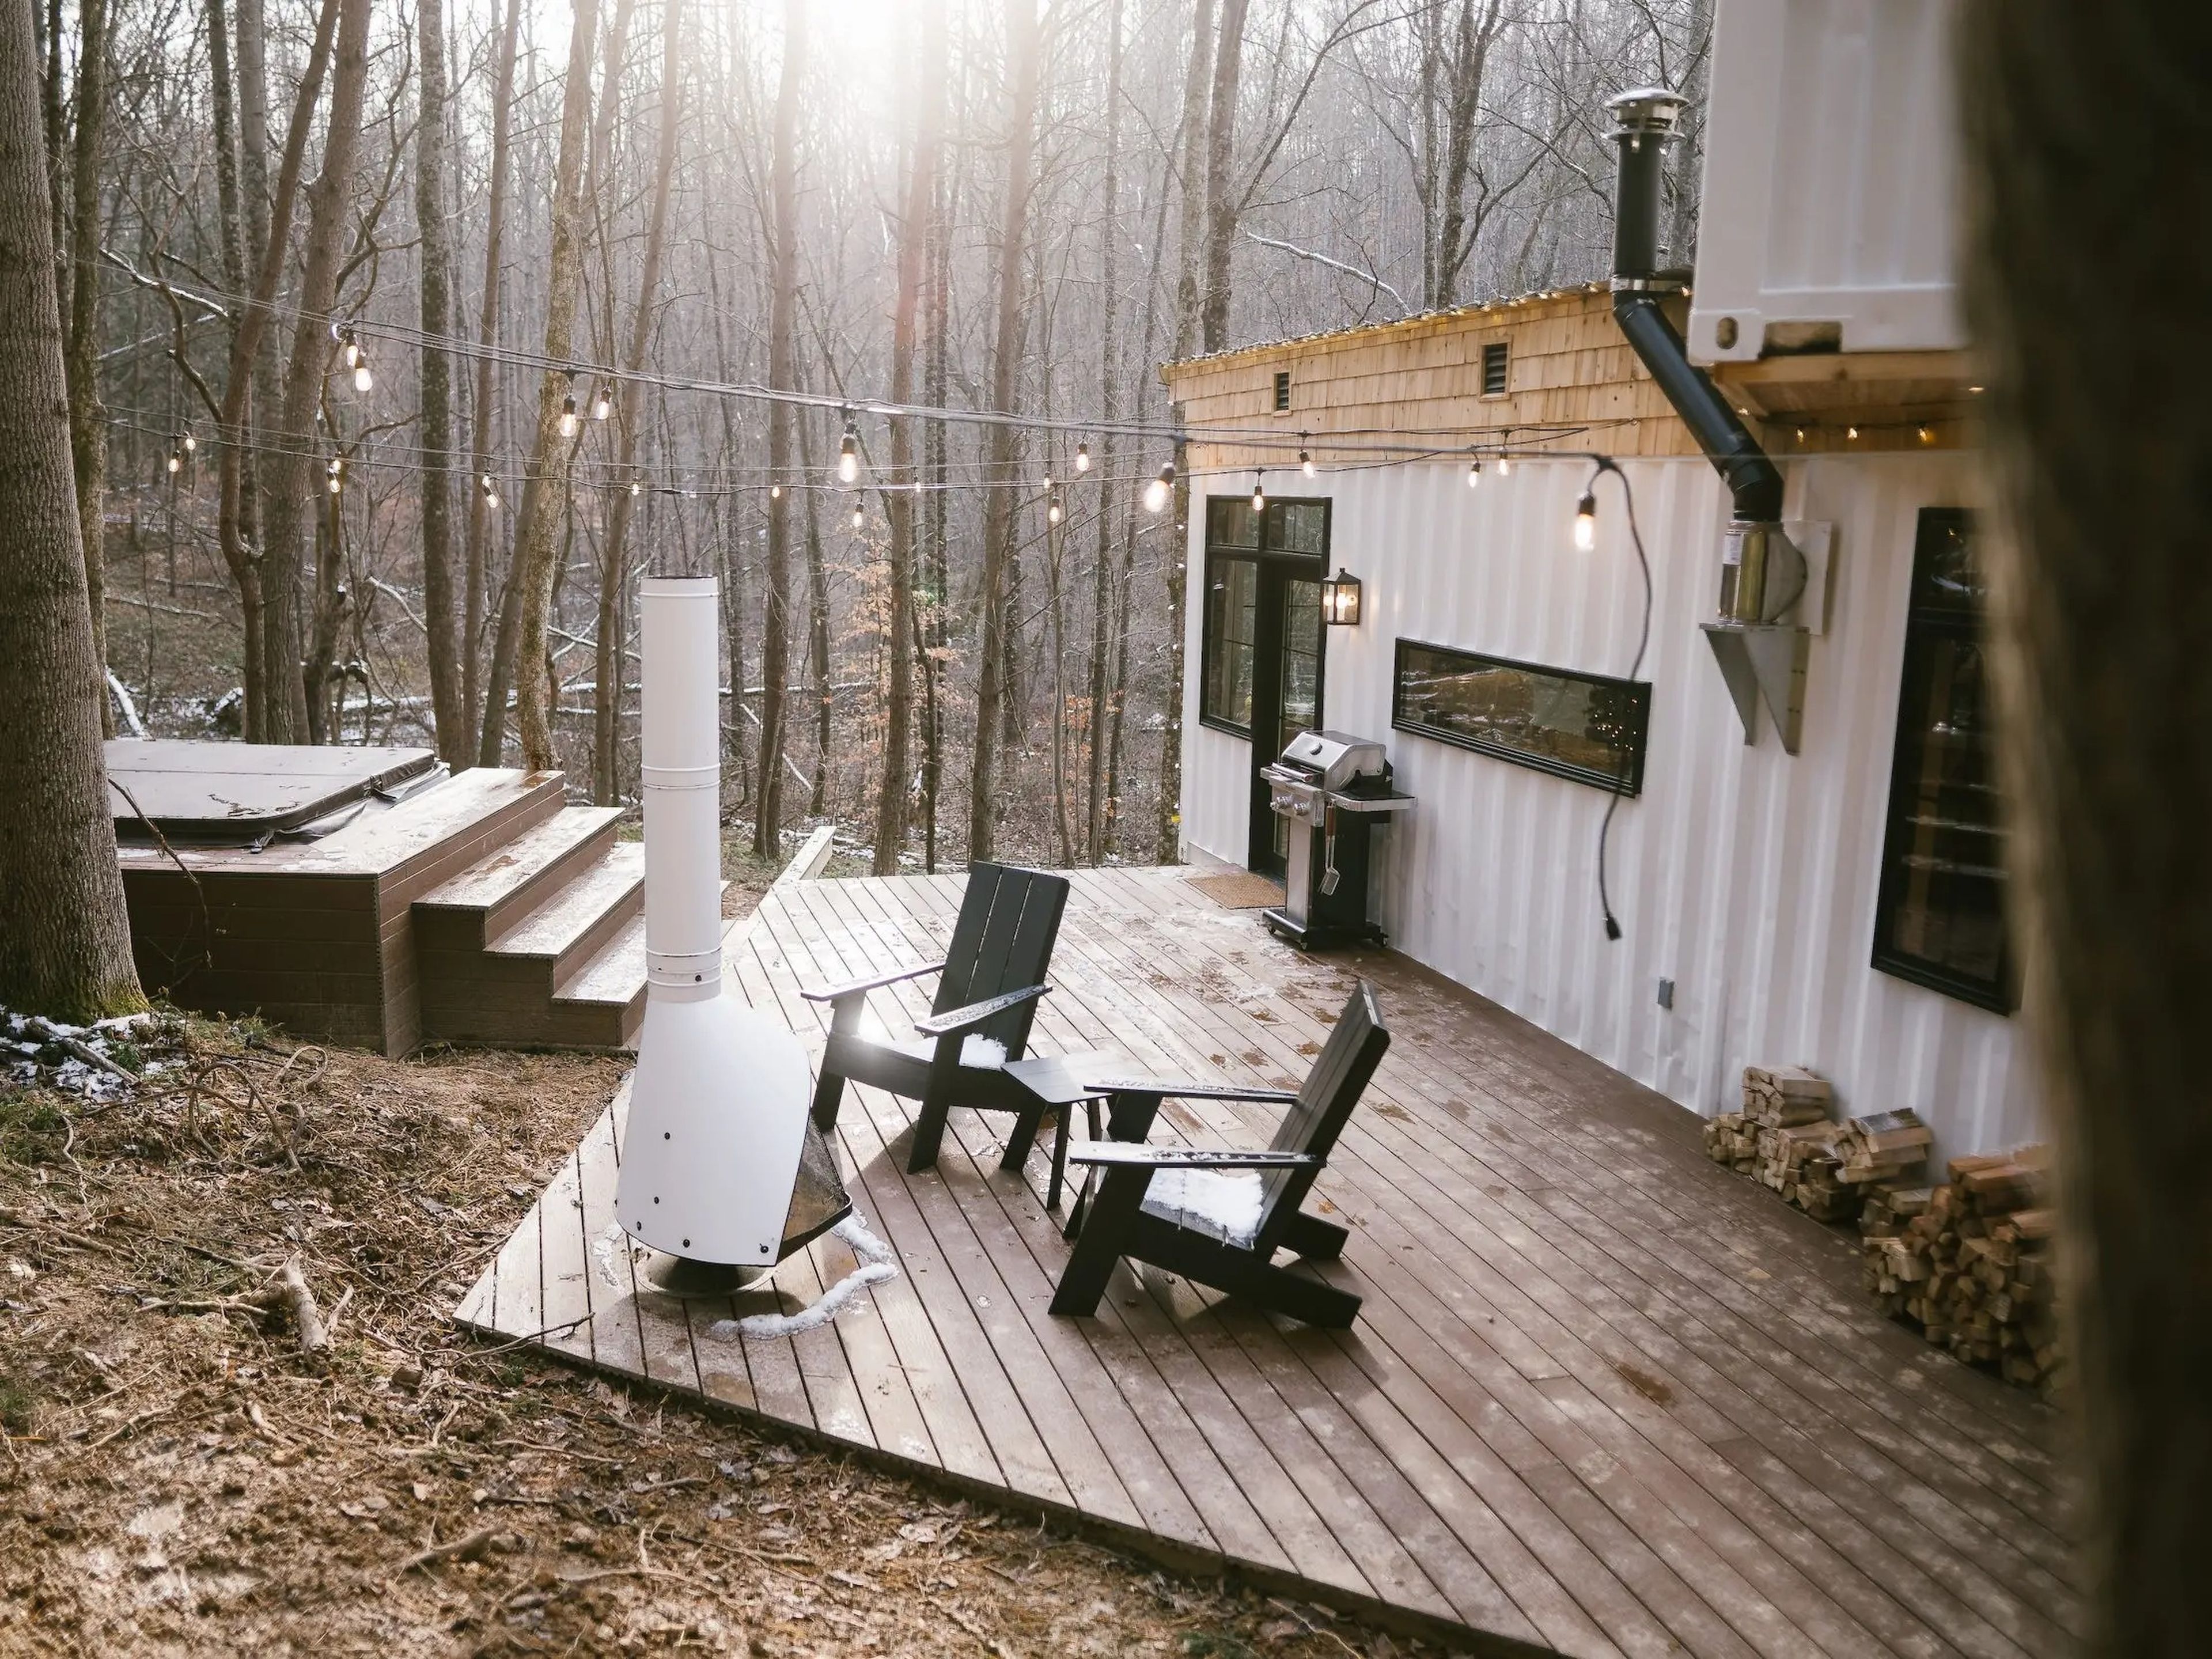 An outdoor deck with chairs and a fireplace at a shipping container home.